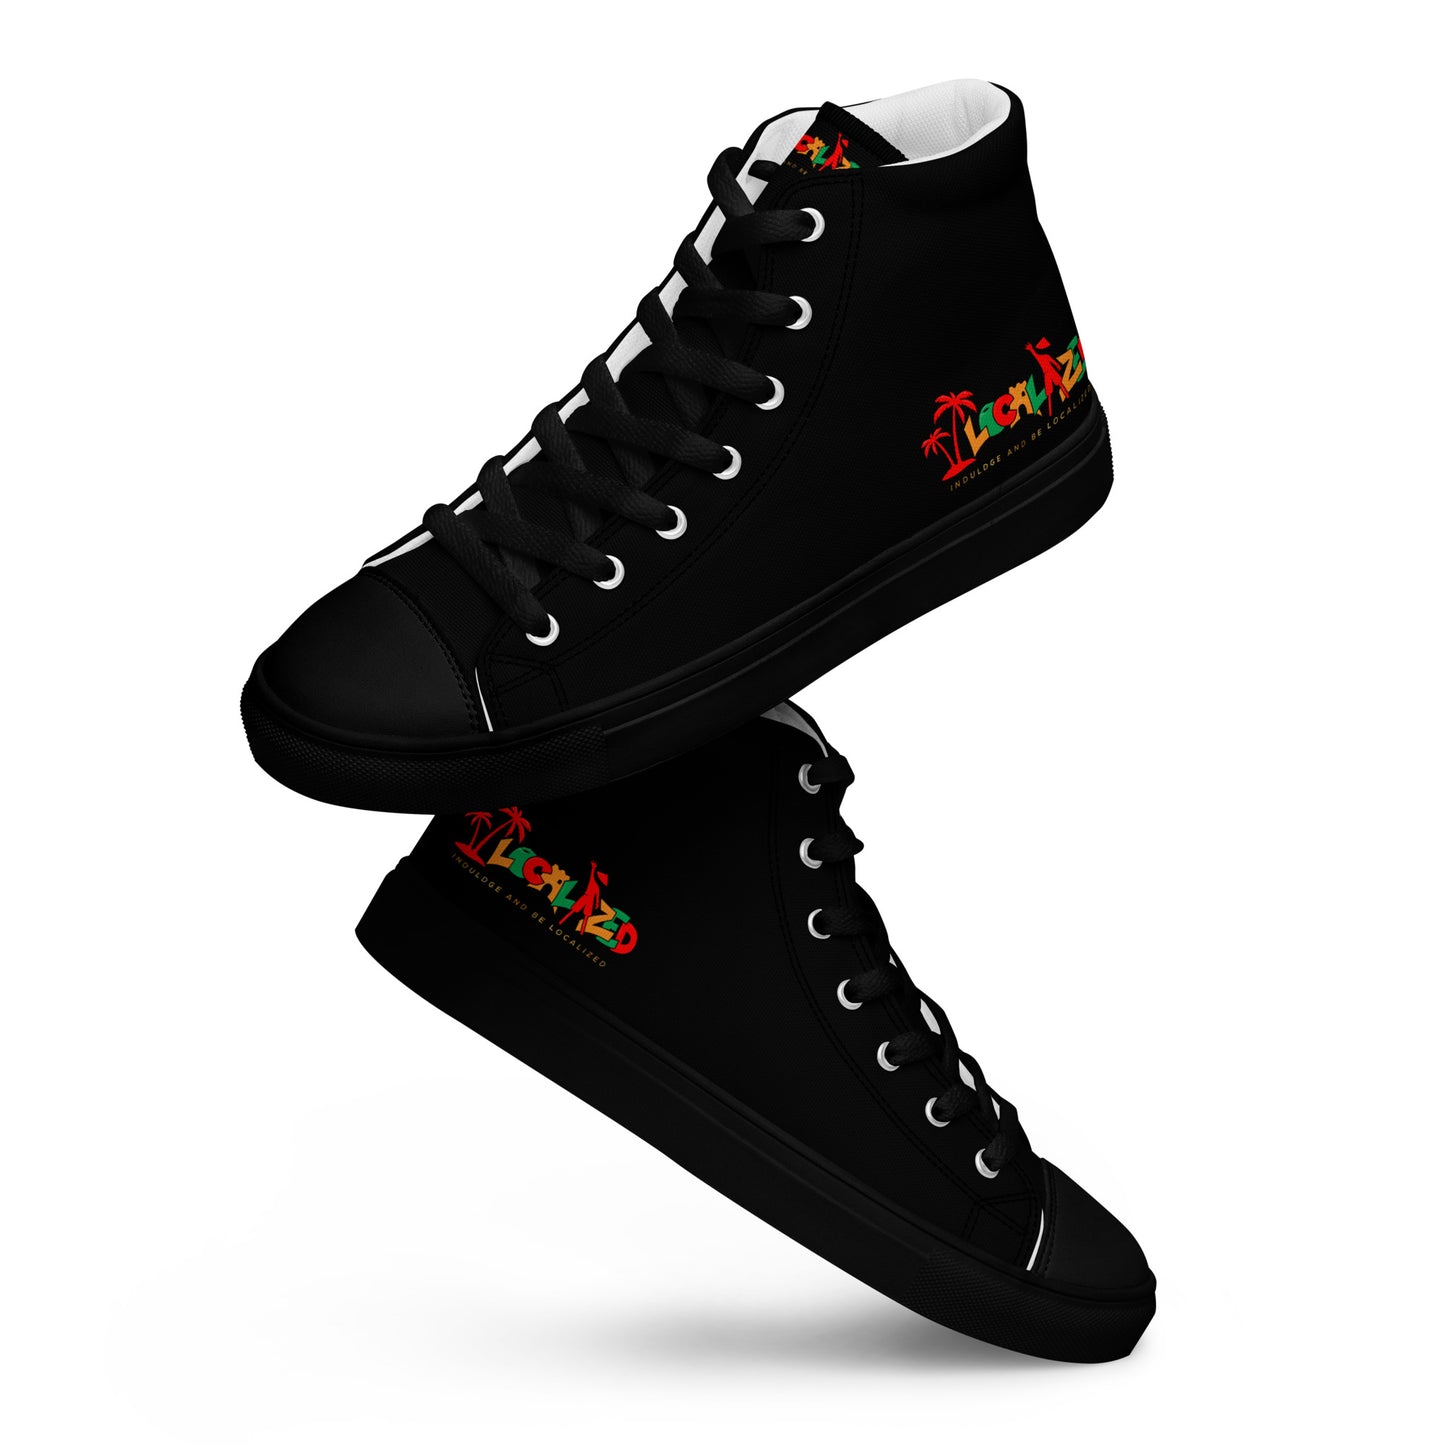 Black V.Localized  (Ice/Gold/Green) Women’s high top canvas shoes